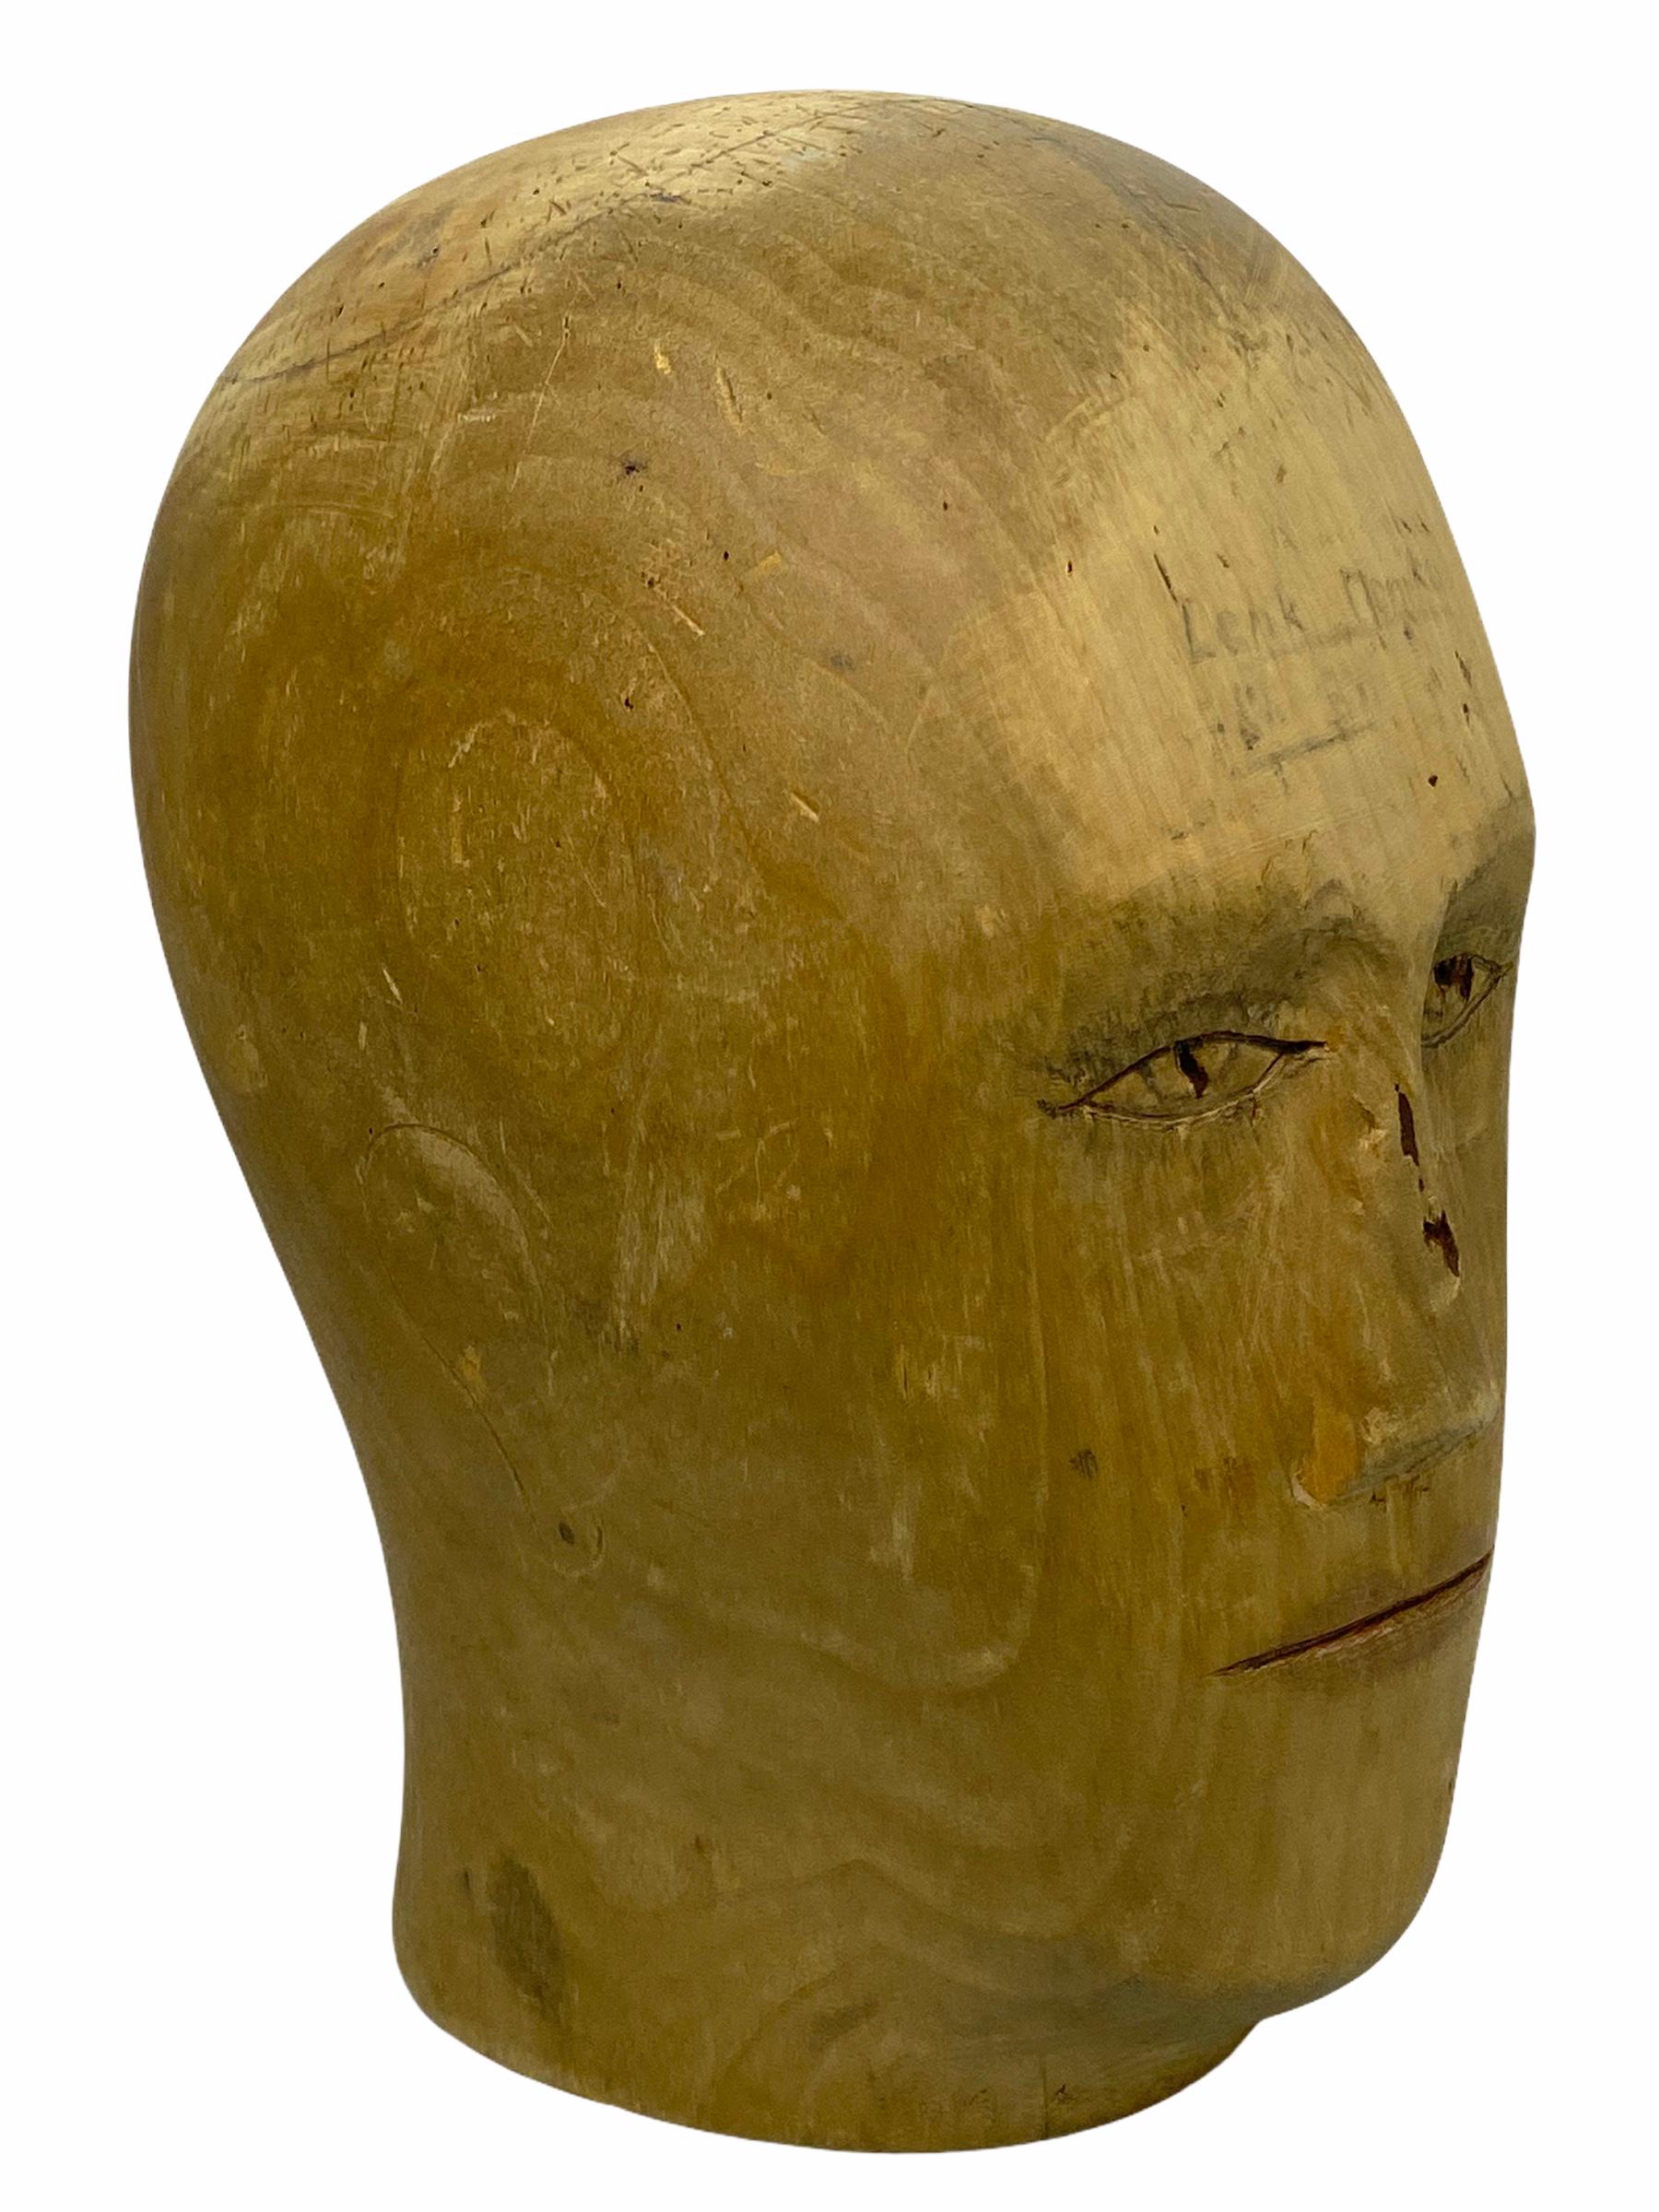 Adorable unique wood carved head. Germany, 1900s. Ideal decoration item, used in the displaying and making of hats. Hand carved from wood. Nice display piece in any room.